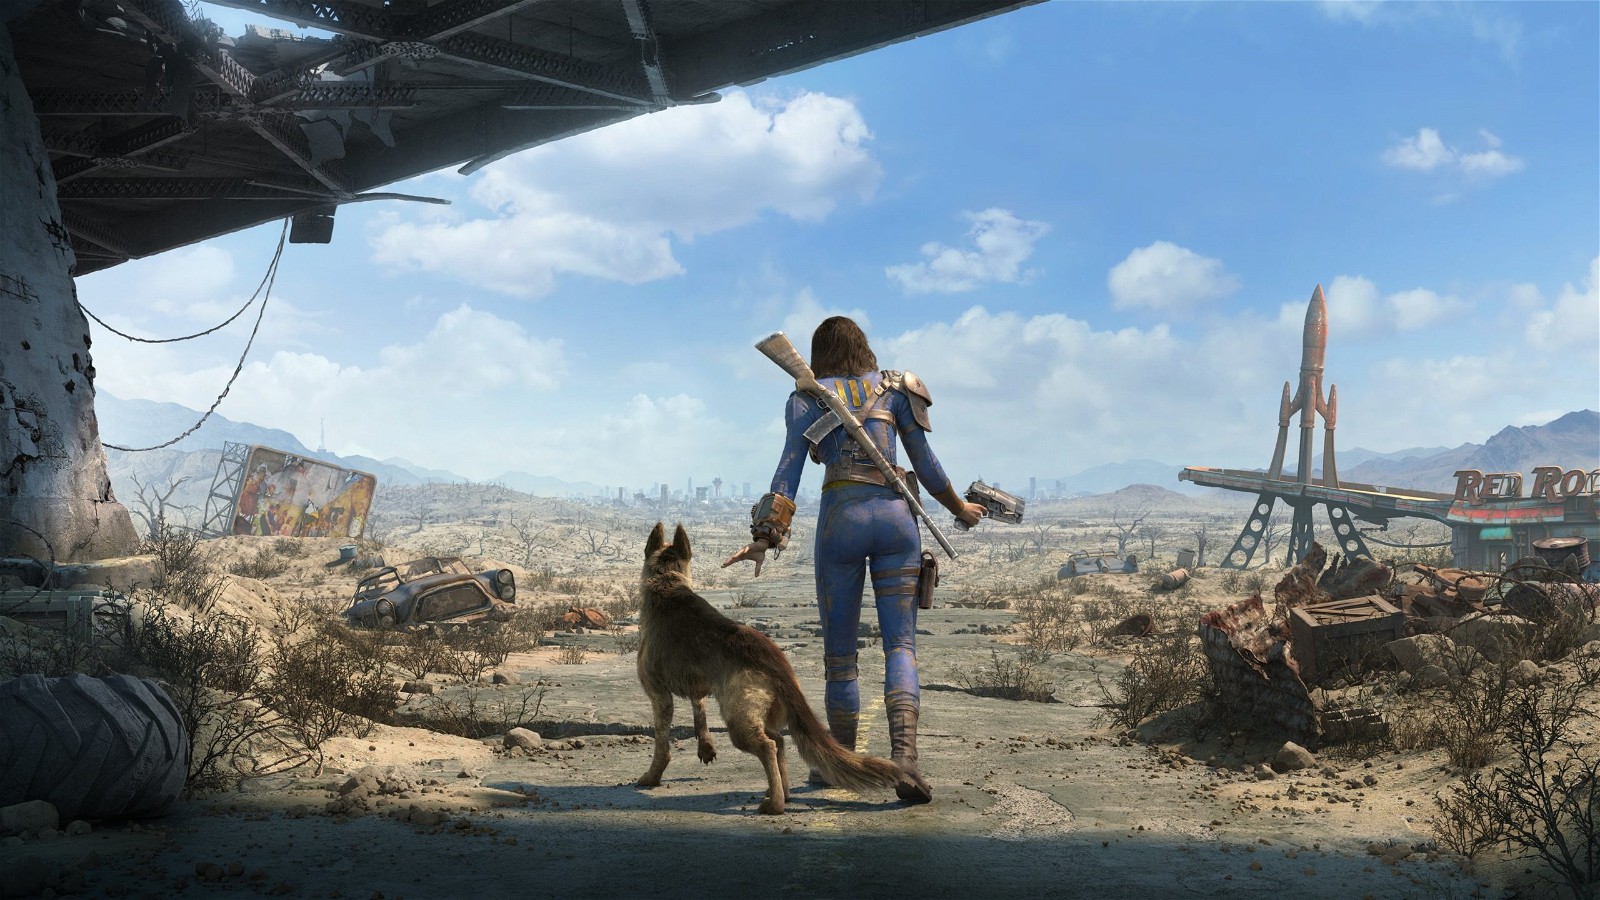 The protagonist walks with her dog to the nuclear Wasteland in Fallout 4